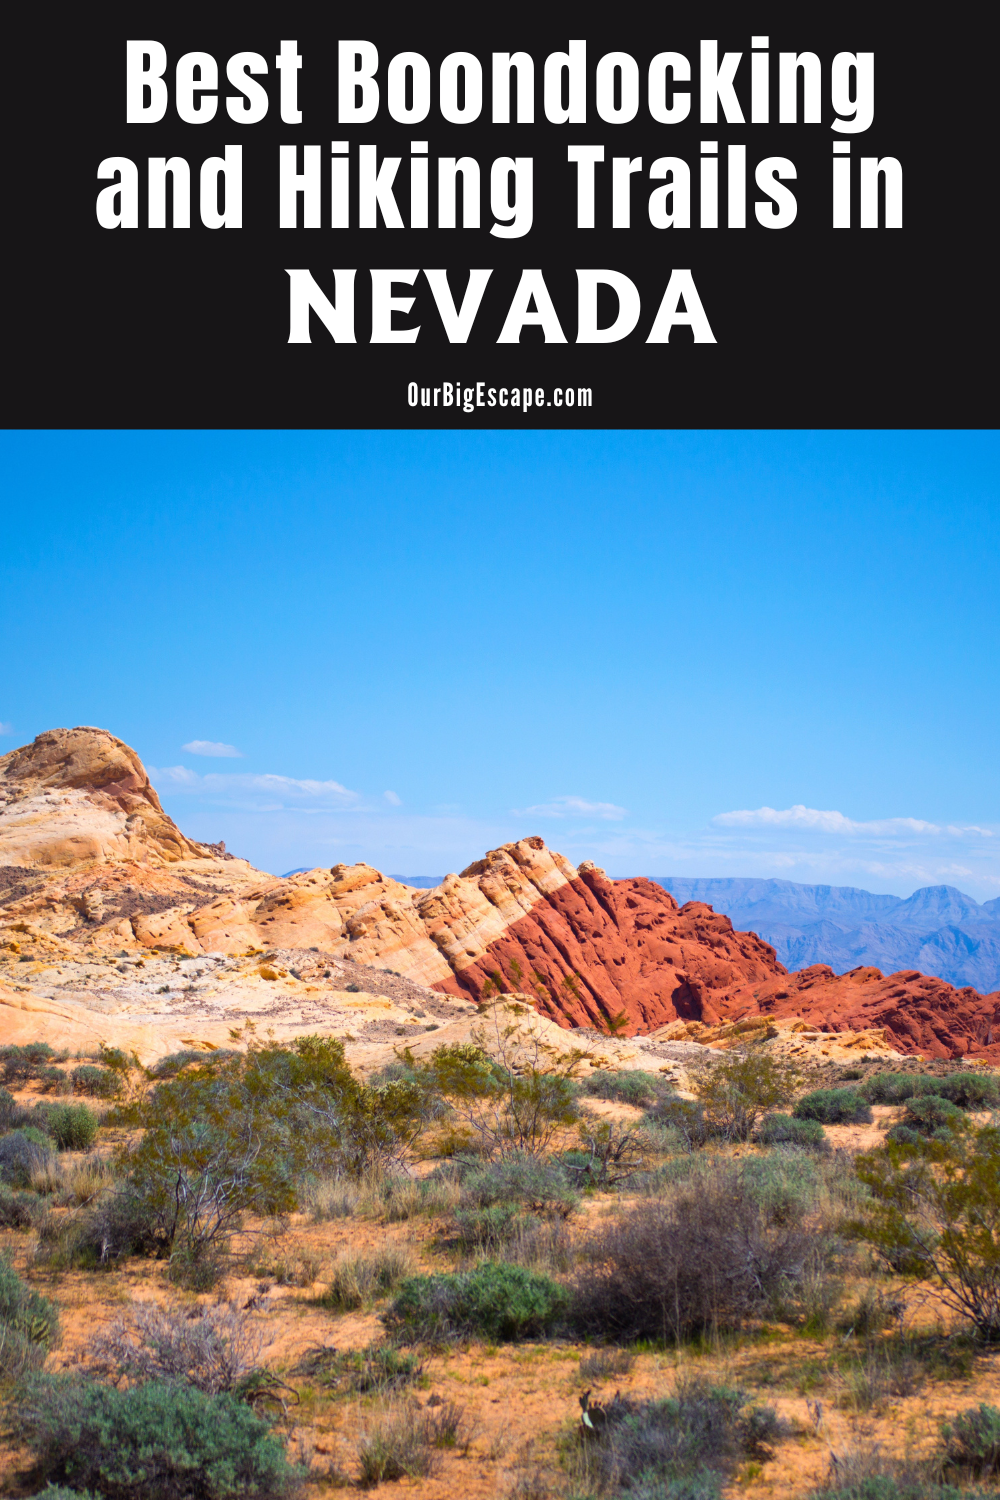 Best Boondocking and Hiking Trails in Nevada